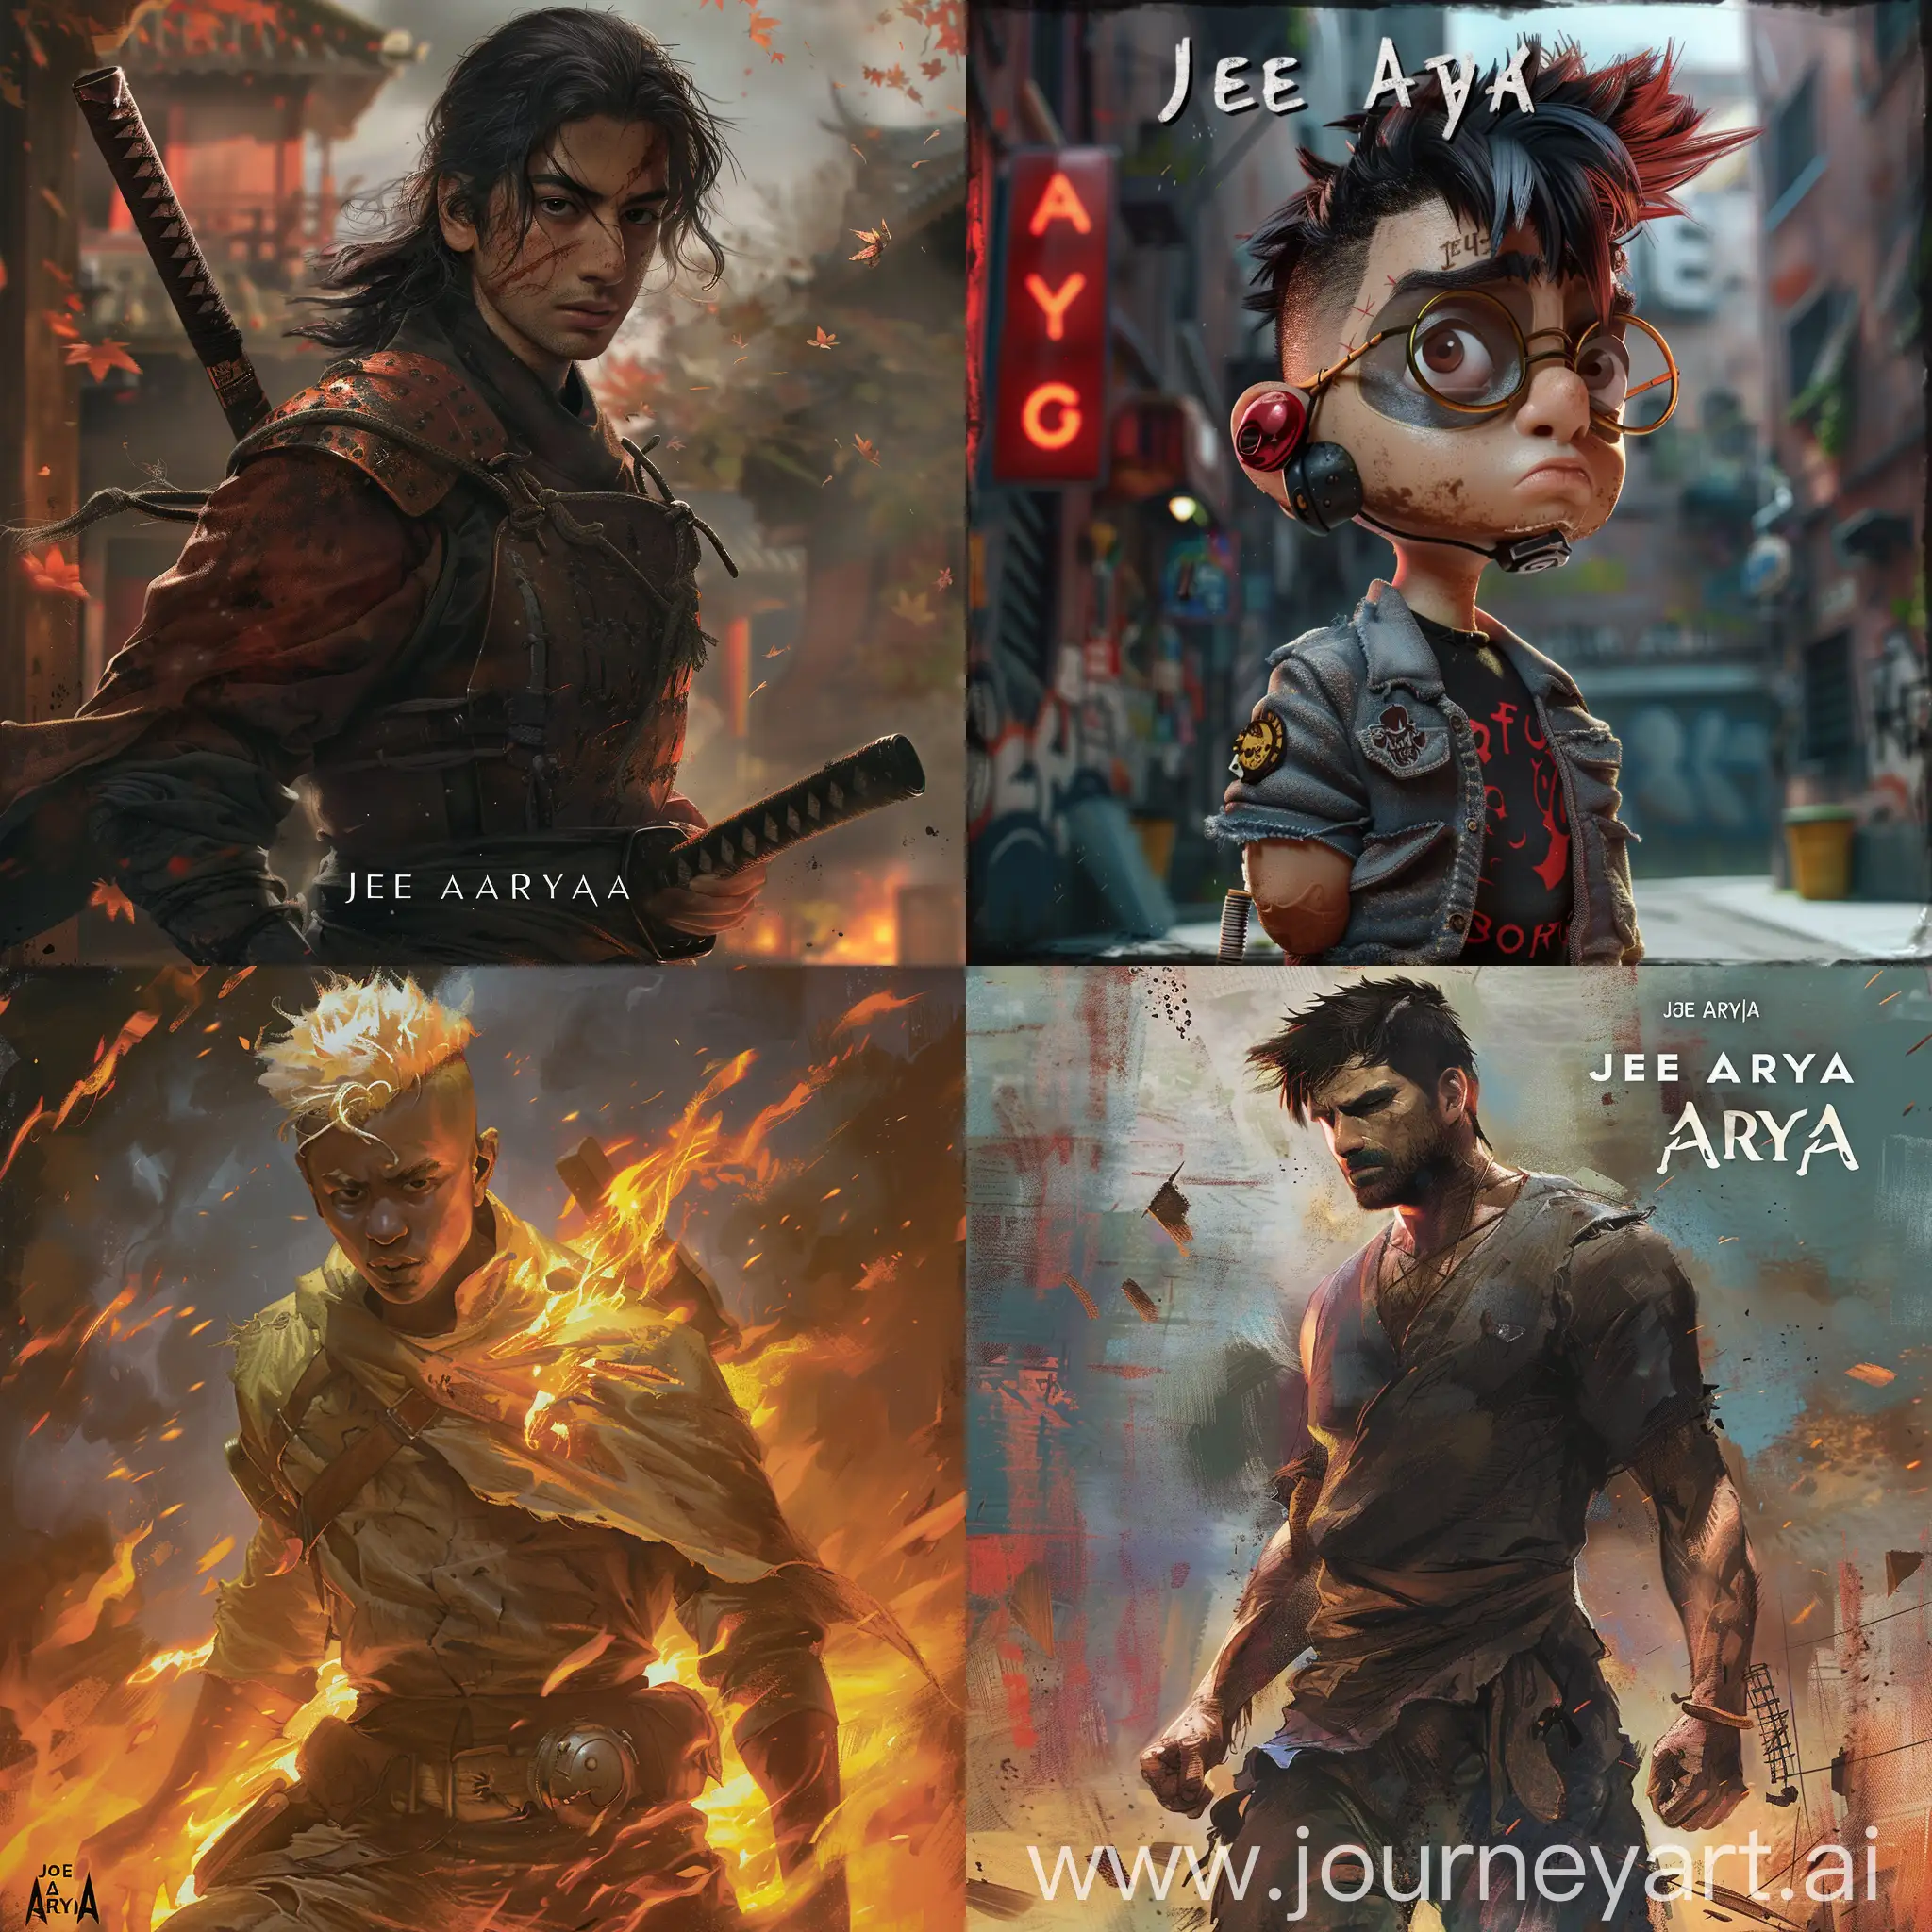 create a cover image for Joe Arya with the image must be 2400 pixels wide by 600 pixels high and in JPEG or PNG format.